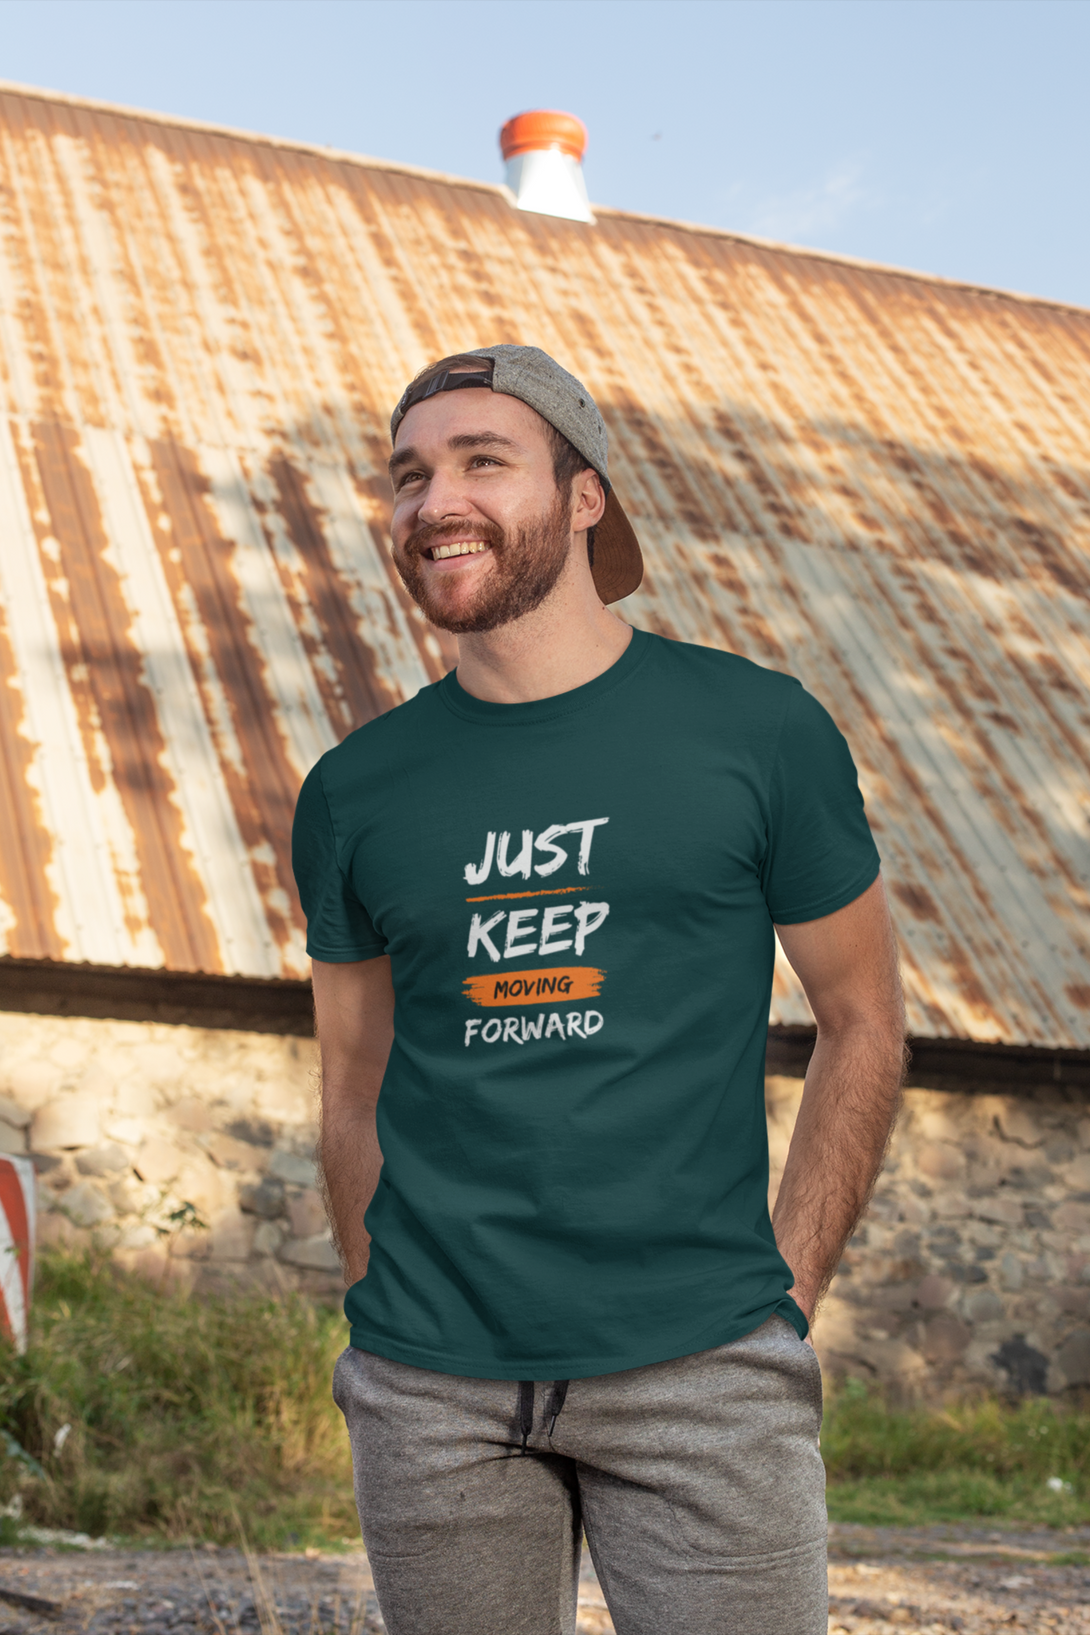 Keep Moving Forward Printed T-Shirt For Men - WowWaves - 2